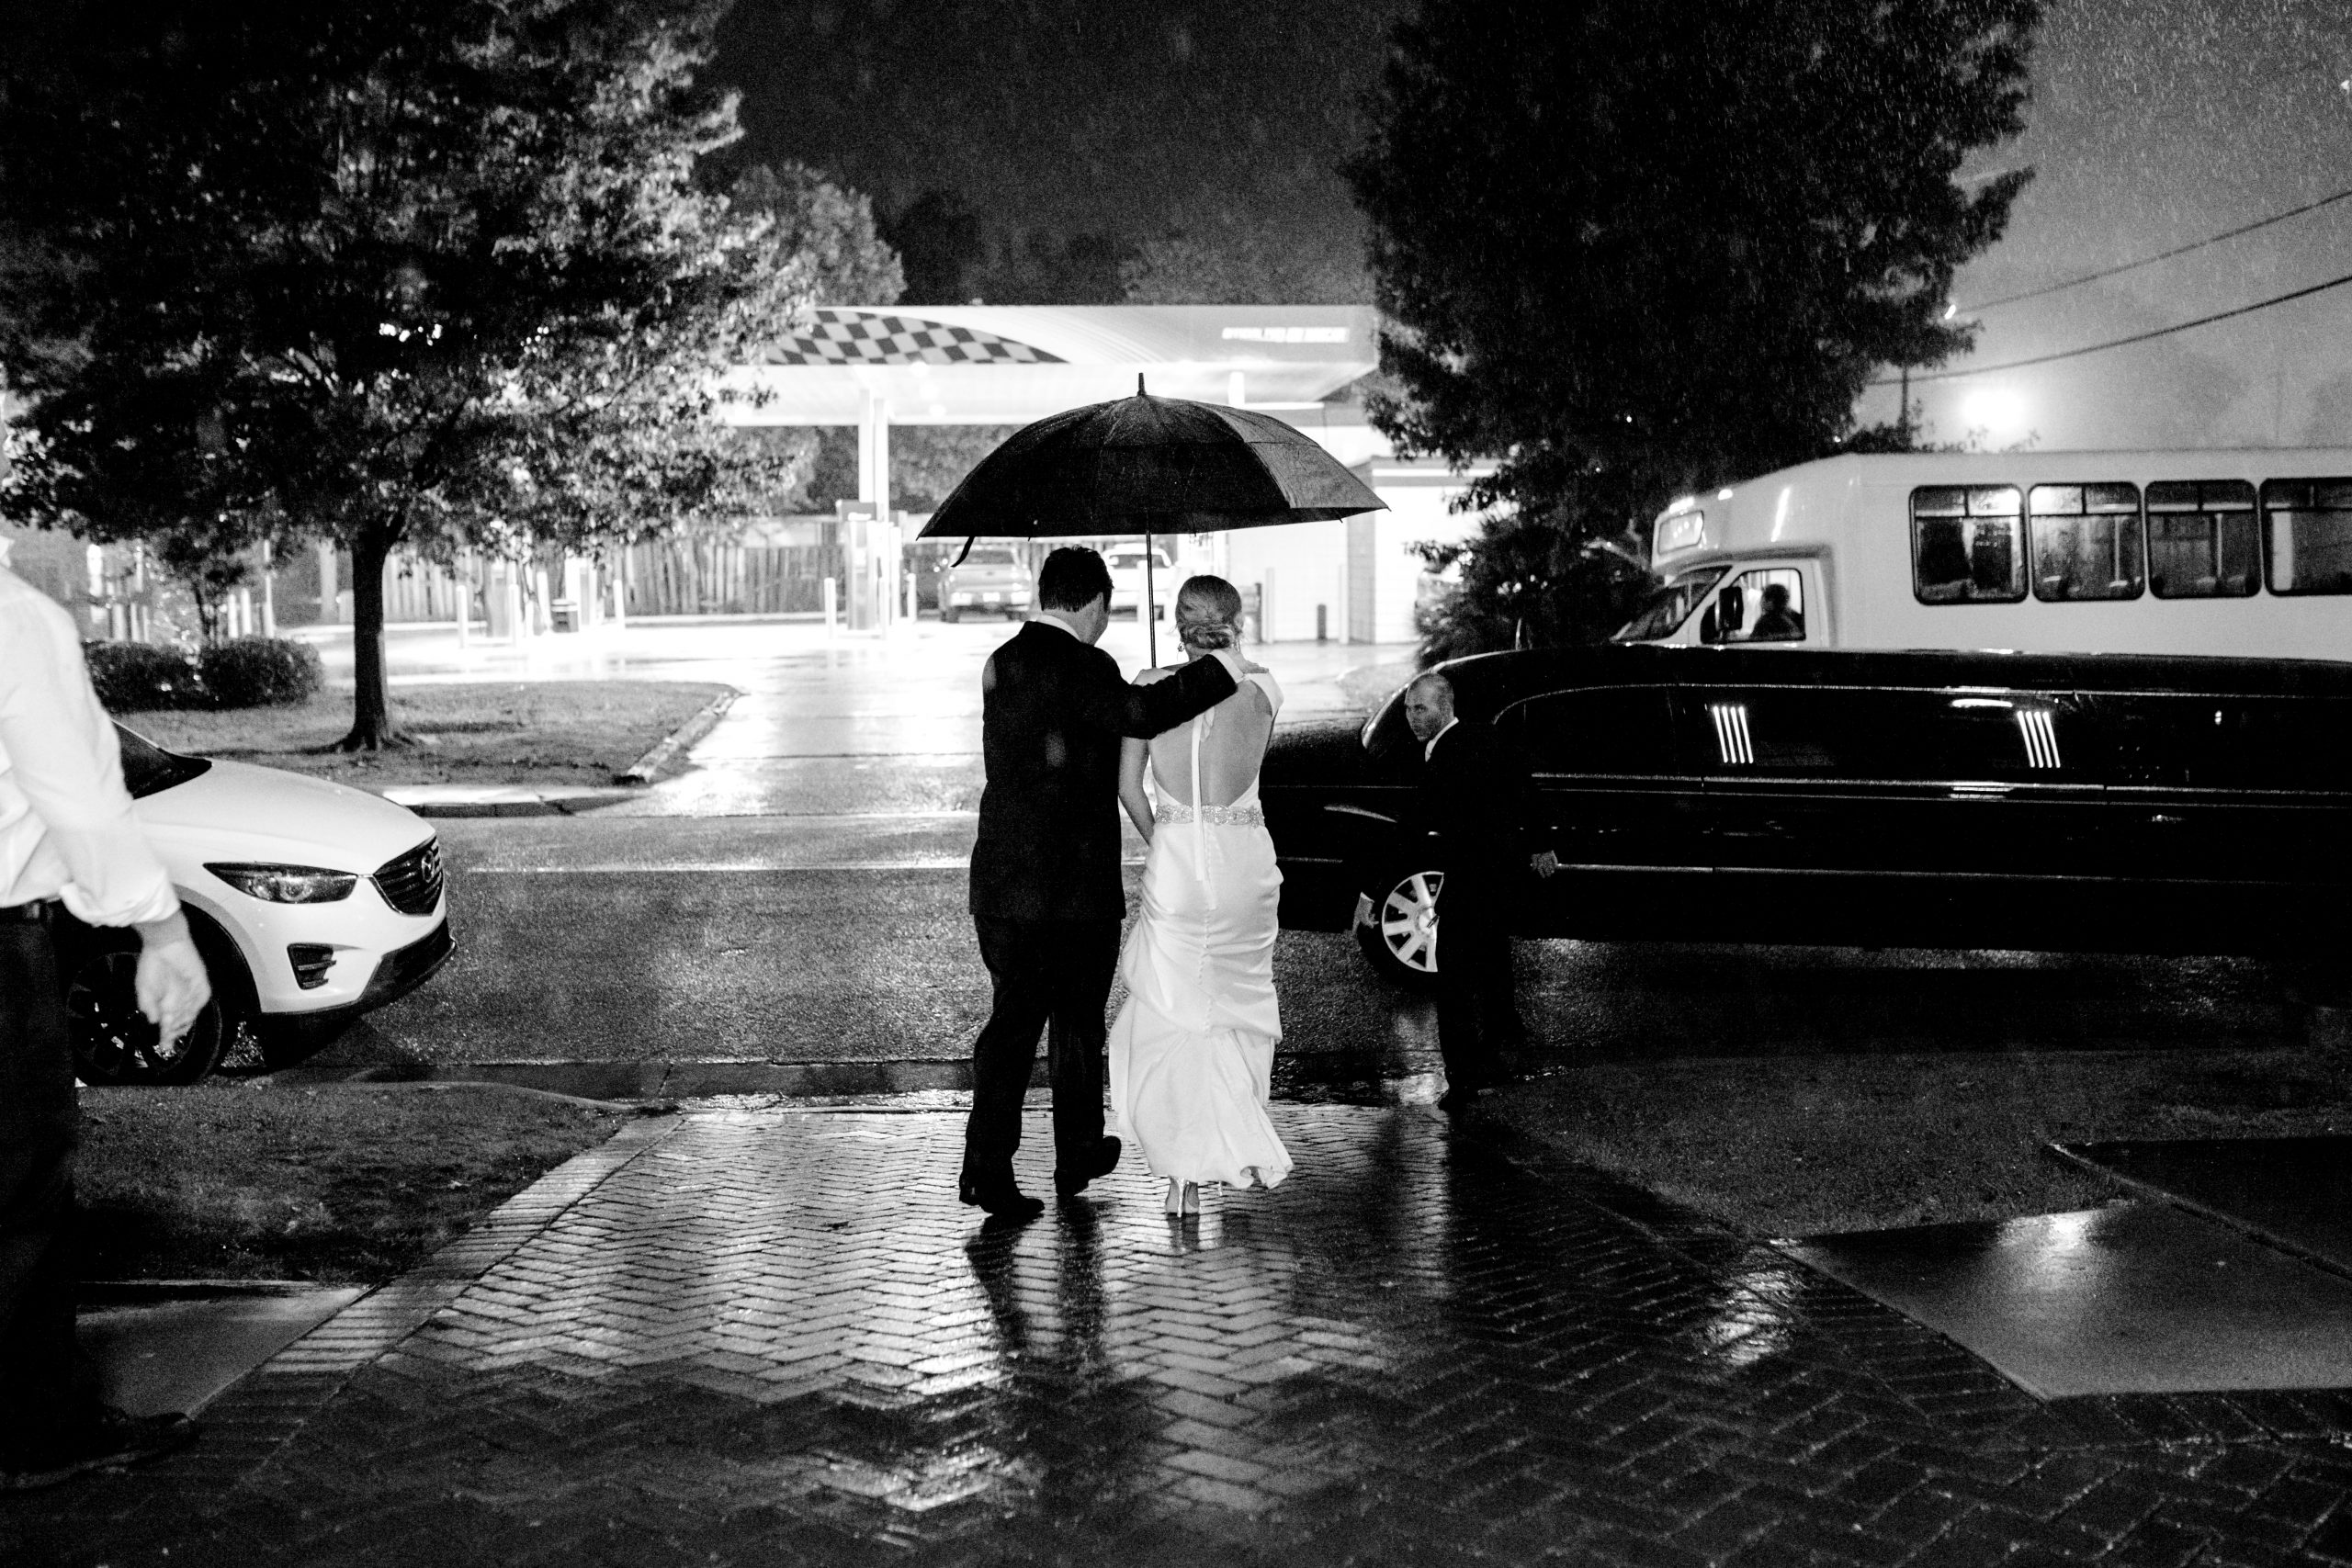 The happy couple exited their memorable evening into a confetti of sprinkling rain.